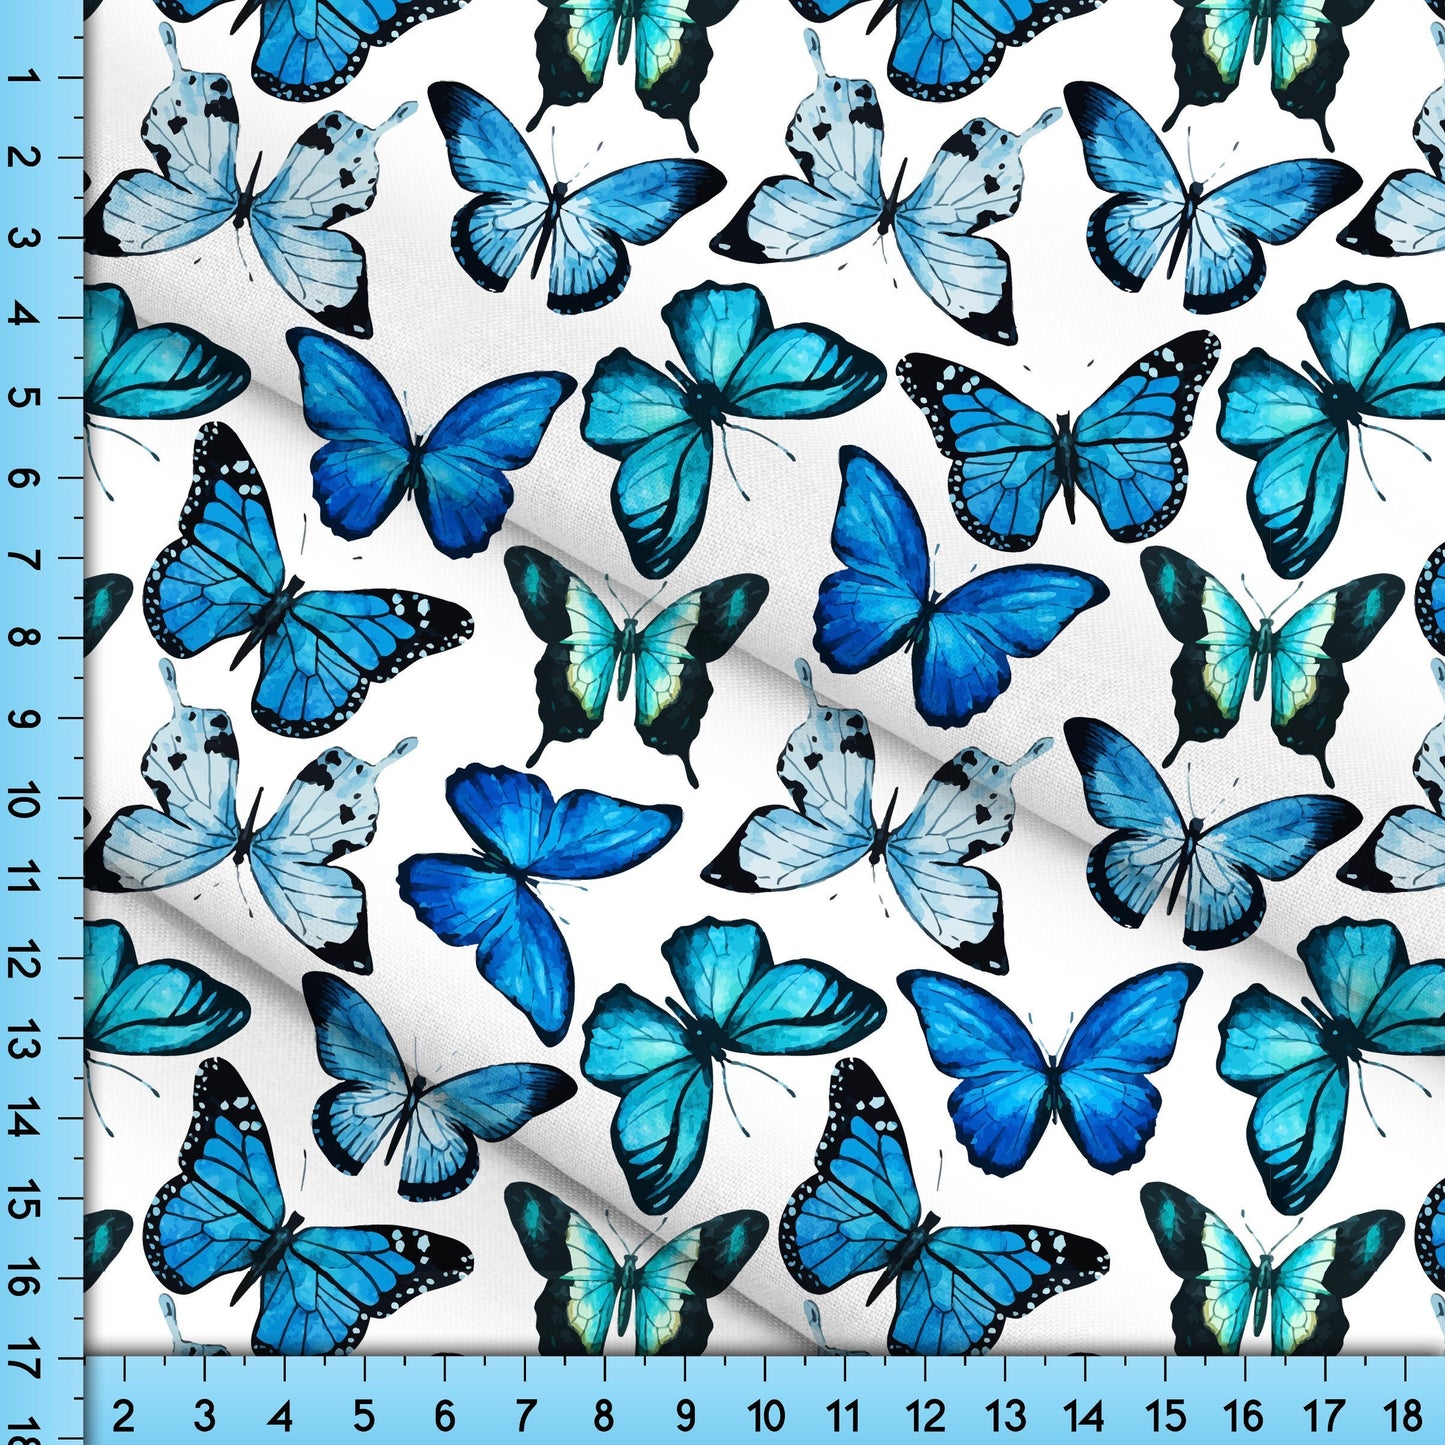 Blue Butterflies on White Fabric By the Yard. Monarch Butterfly Pattern, Cottagecore Design for Crafts, Upholstery, Clothing